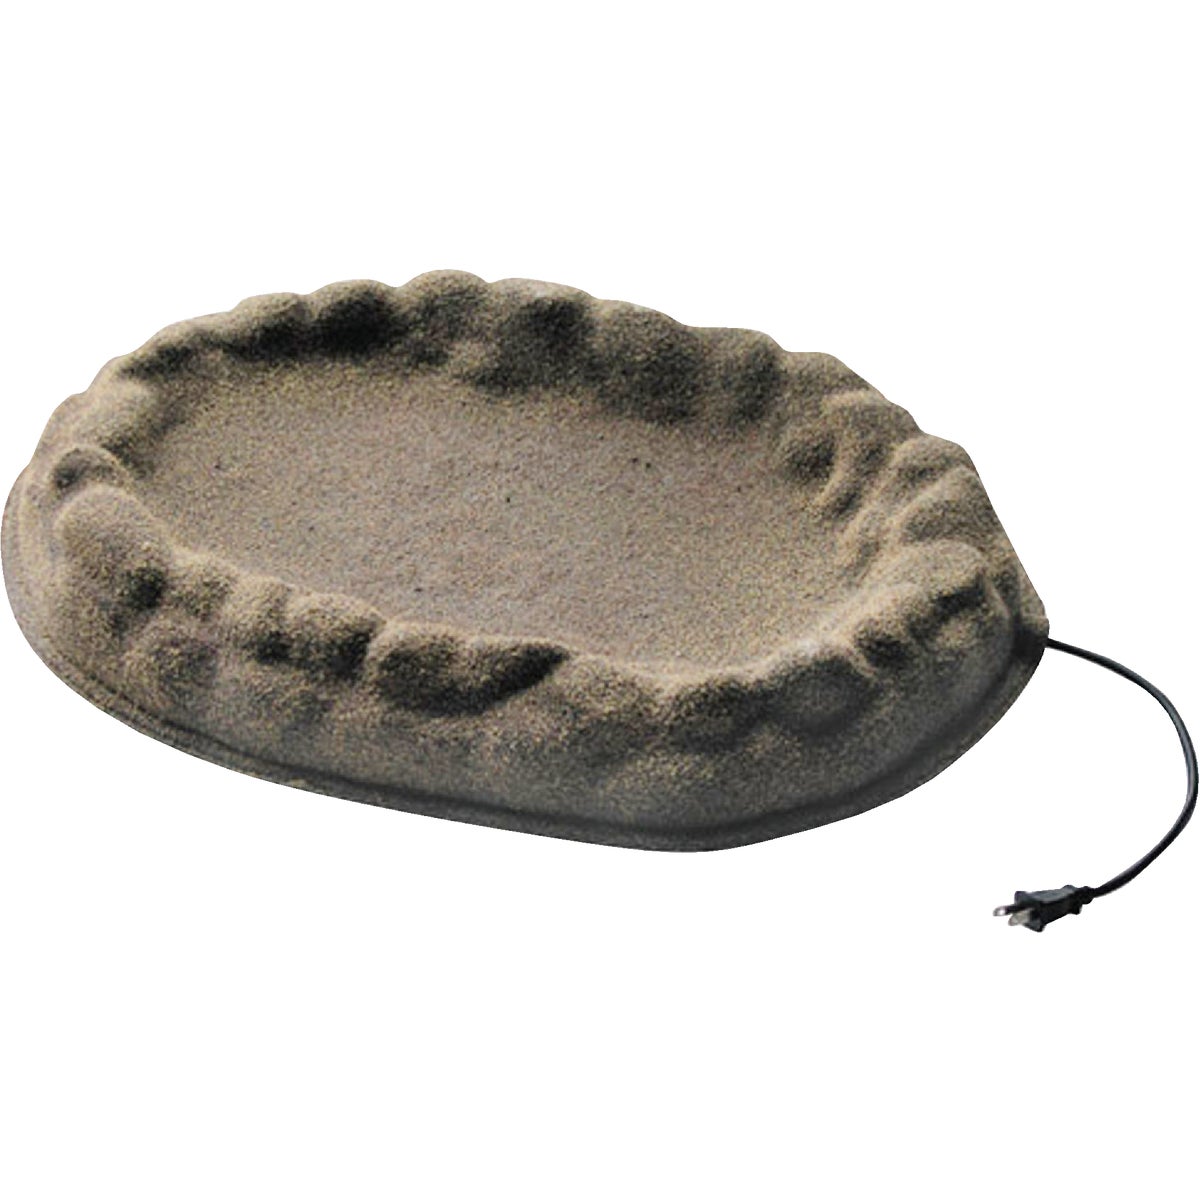 Item 700033, This bird bath is an attractive sand-coated oasis with a concealed heating 